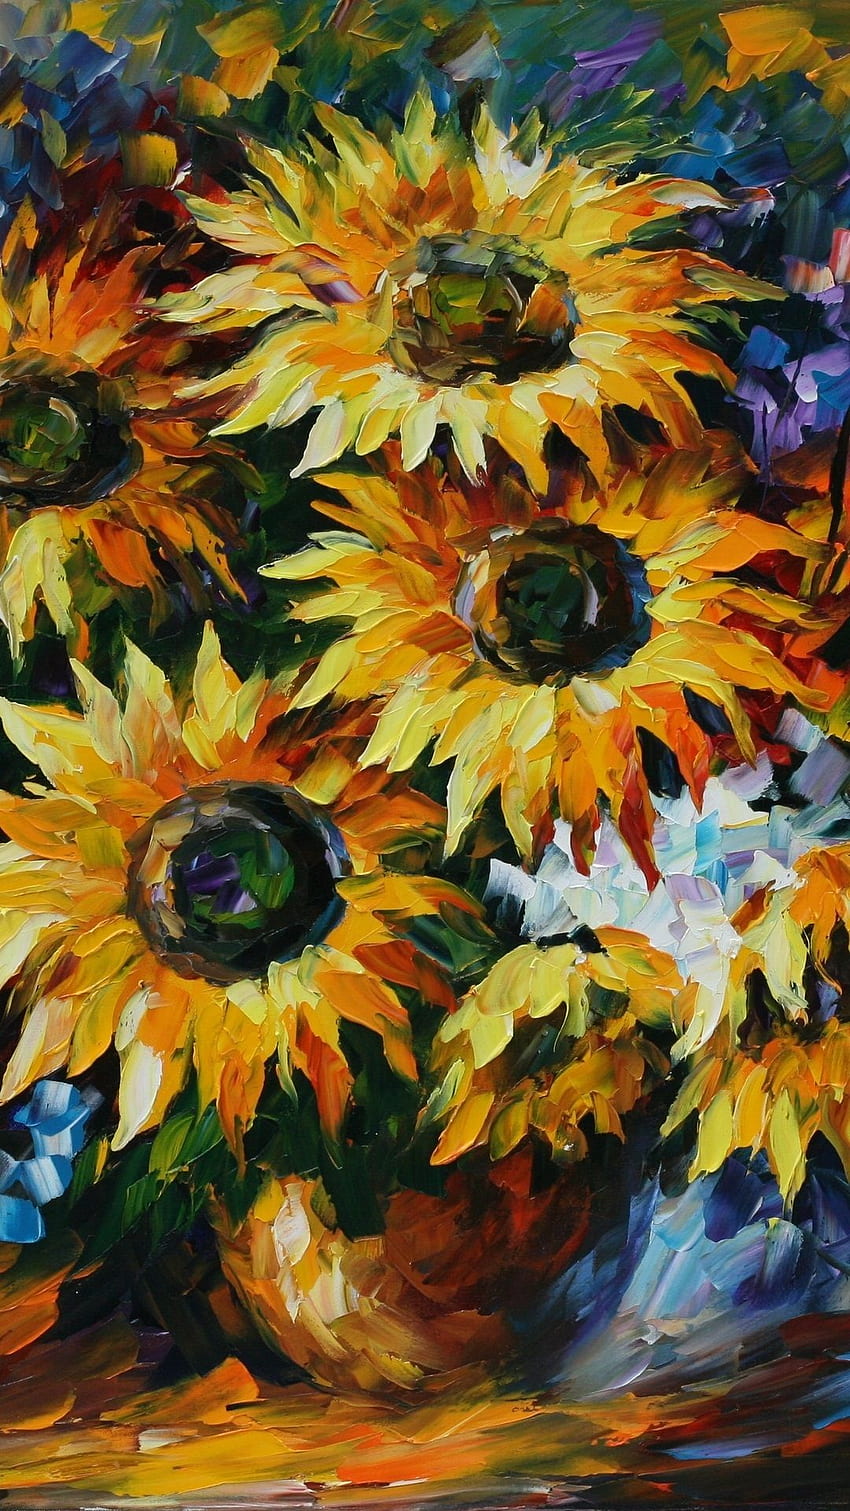 Download Sunflower painting, Painting, Sunflowers, Sun, Wall, Frame,  Graphics, 4d Wallpaper in 750x1334 Resolution